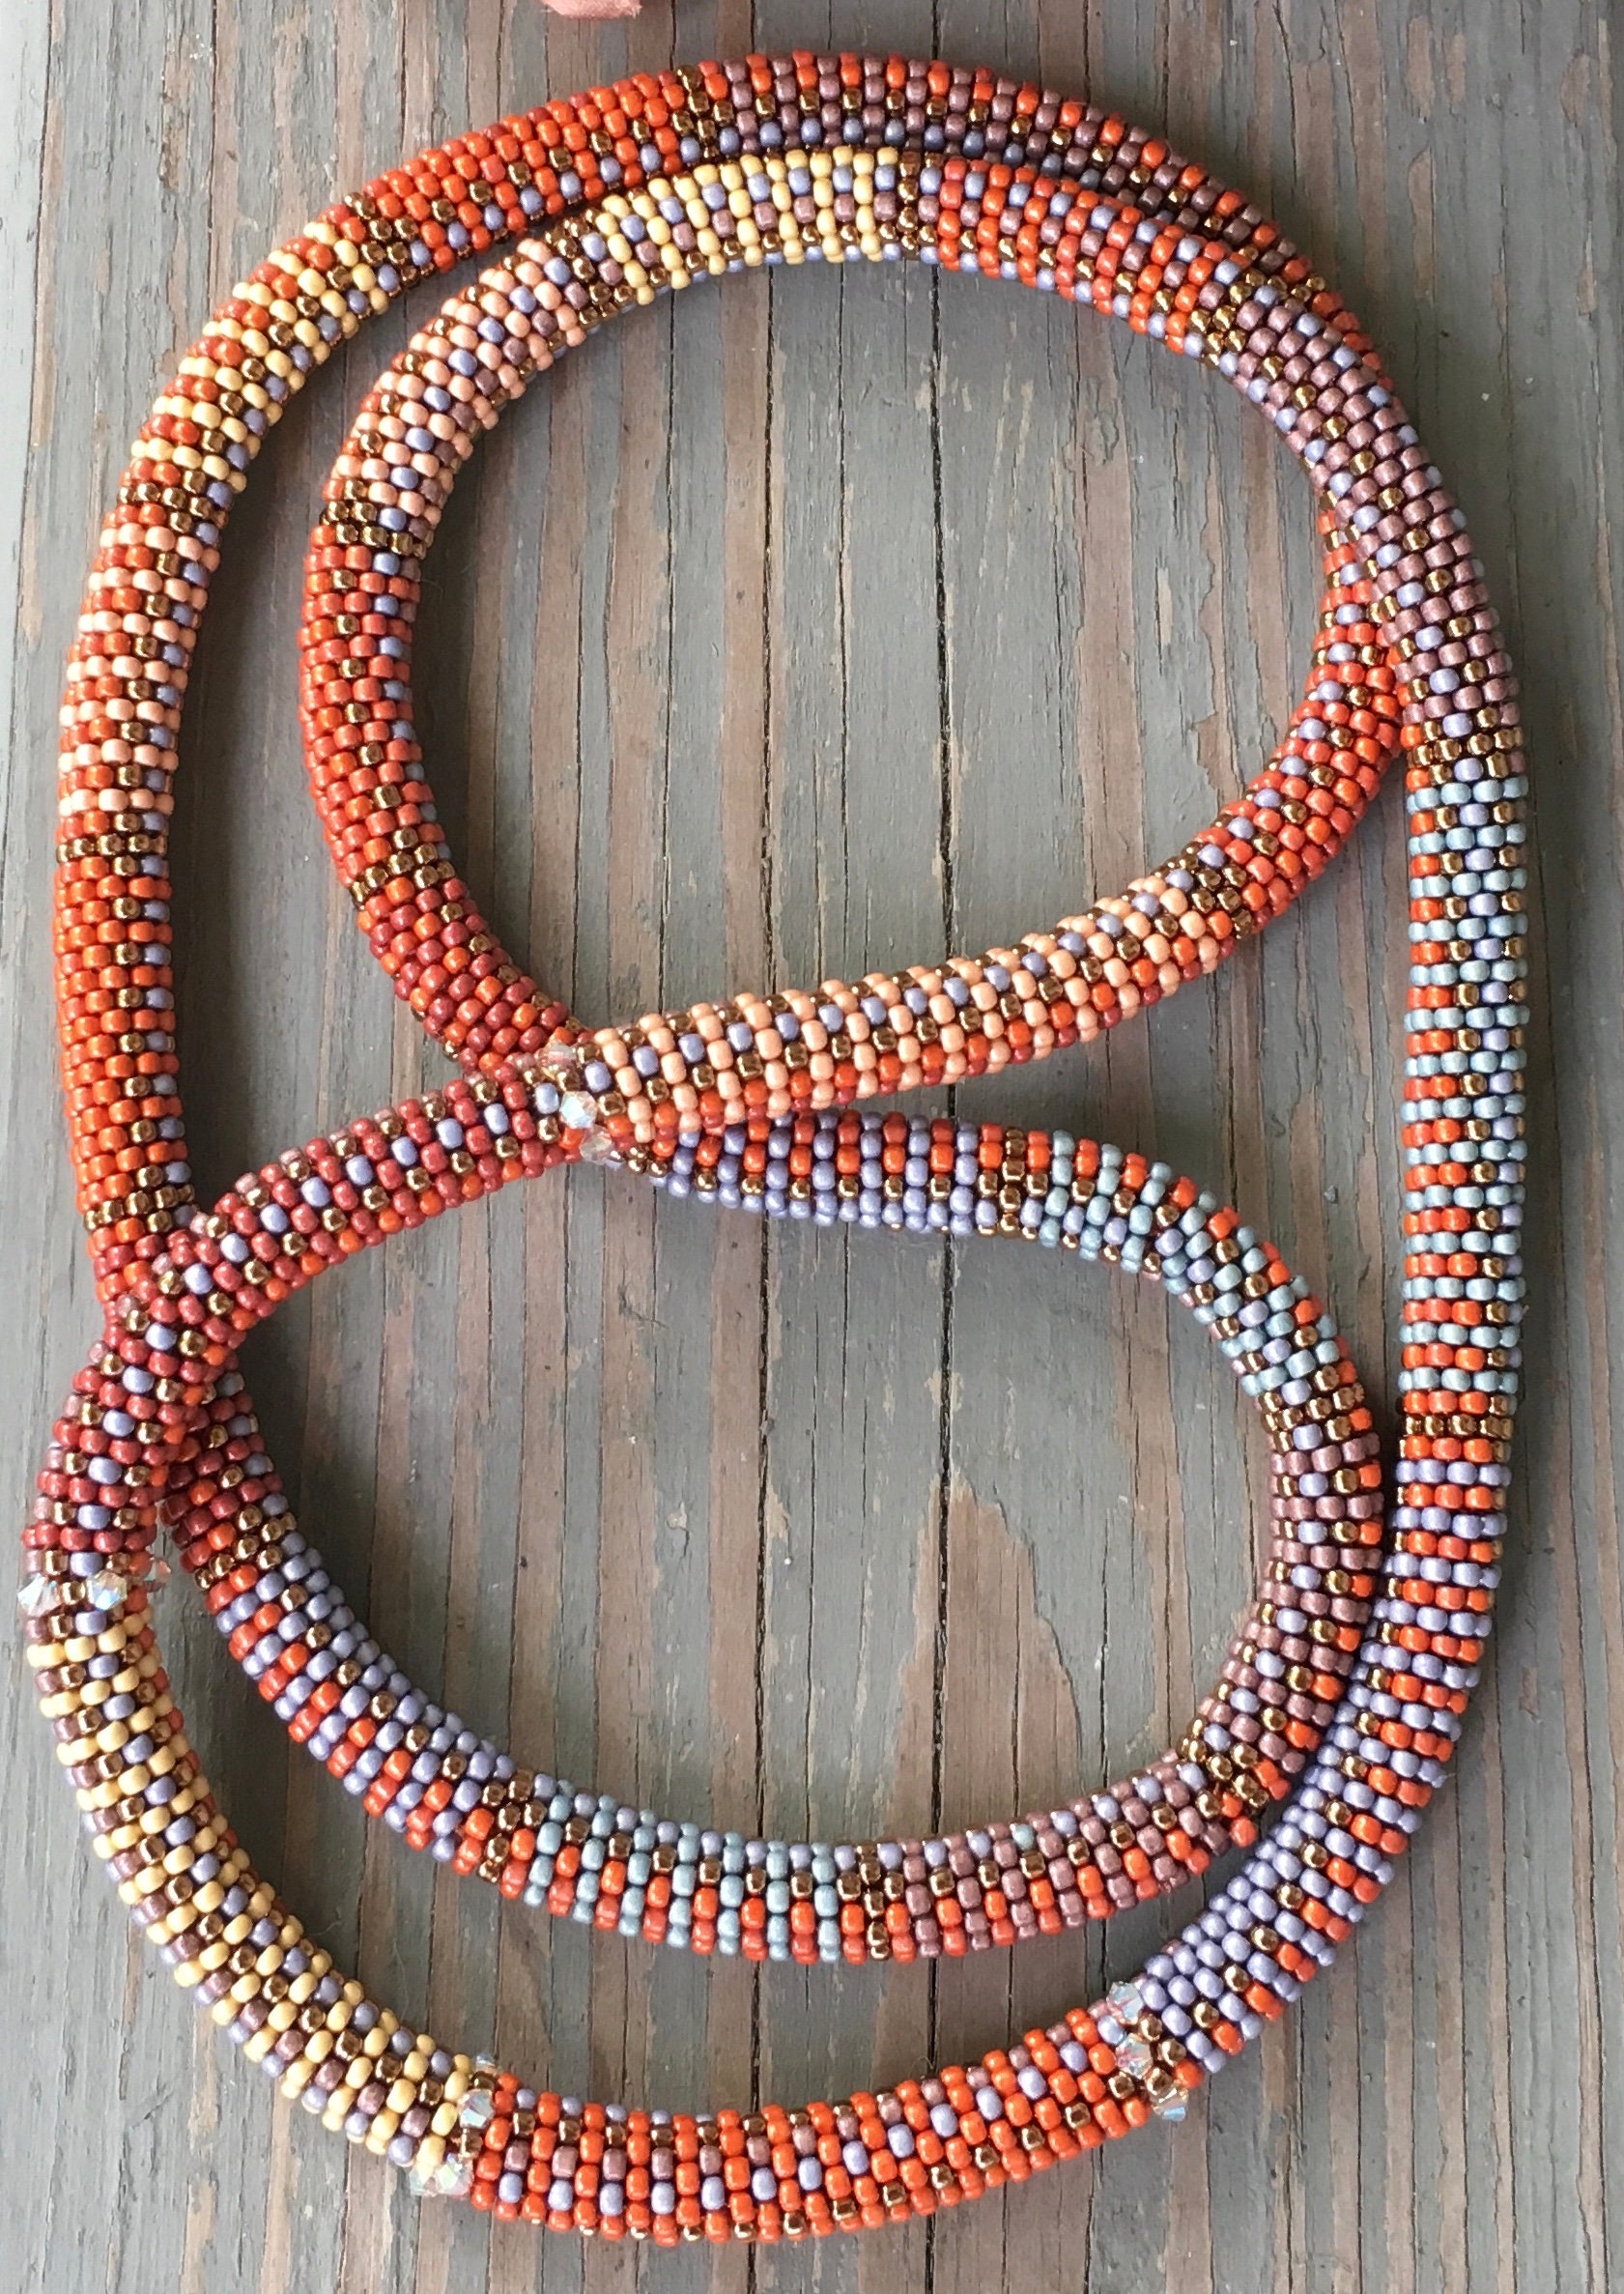 Eclectic Beaded Crochet Jewelry Online Course - Jeanne Oliver